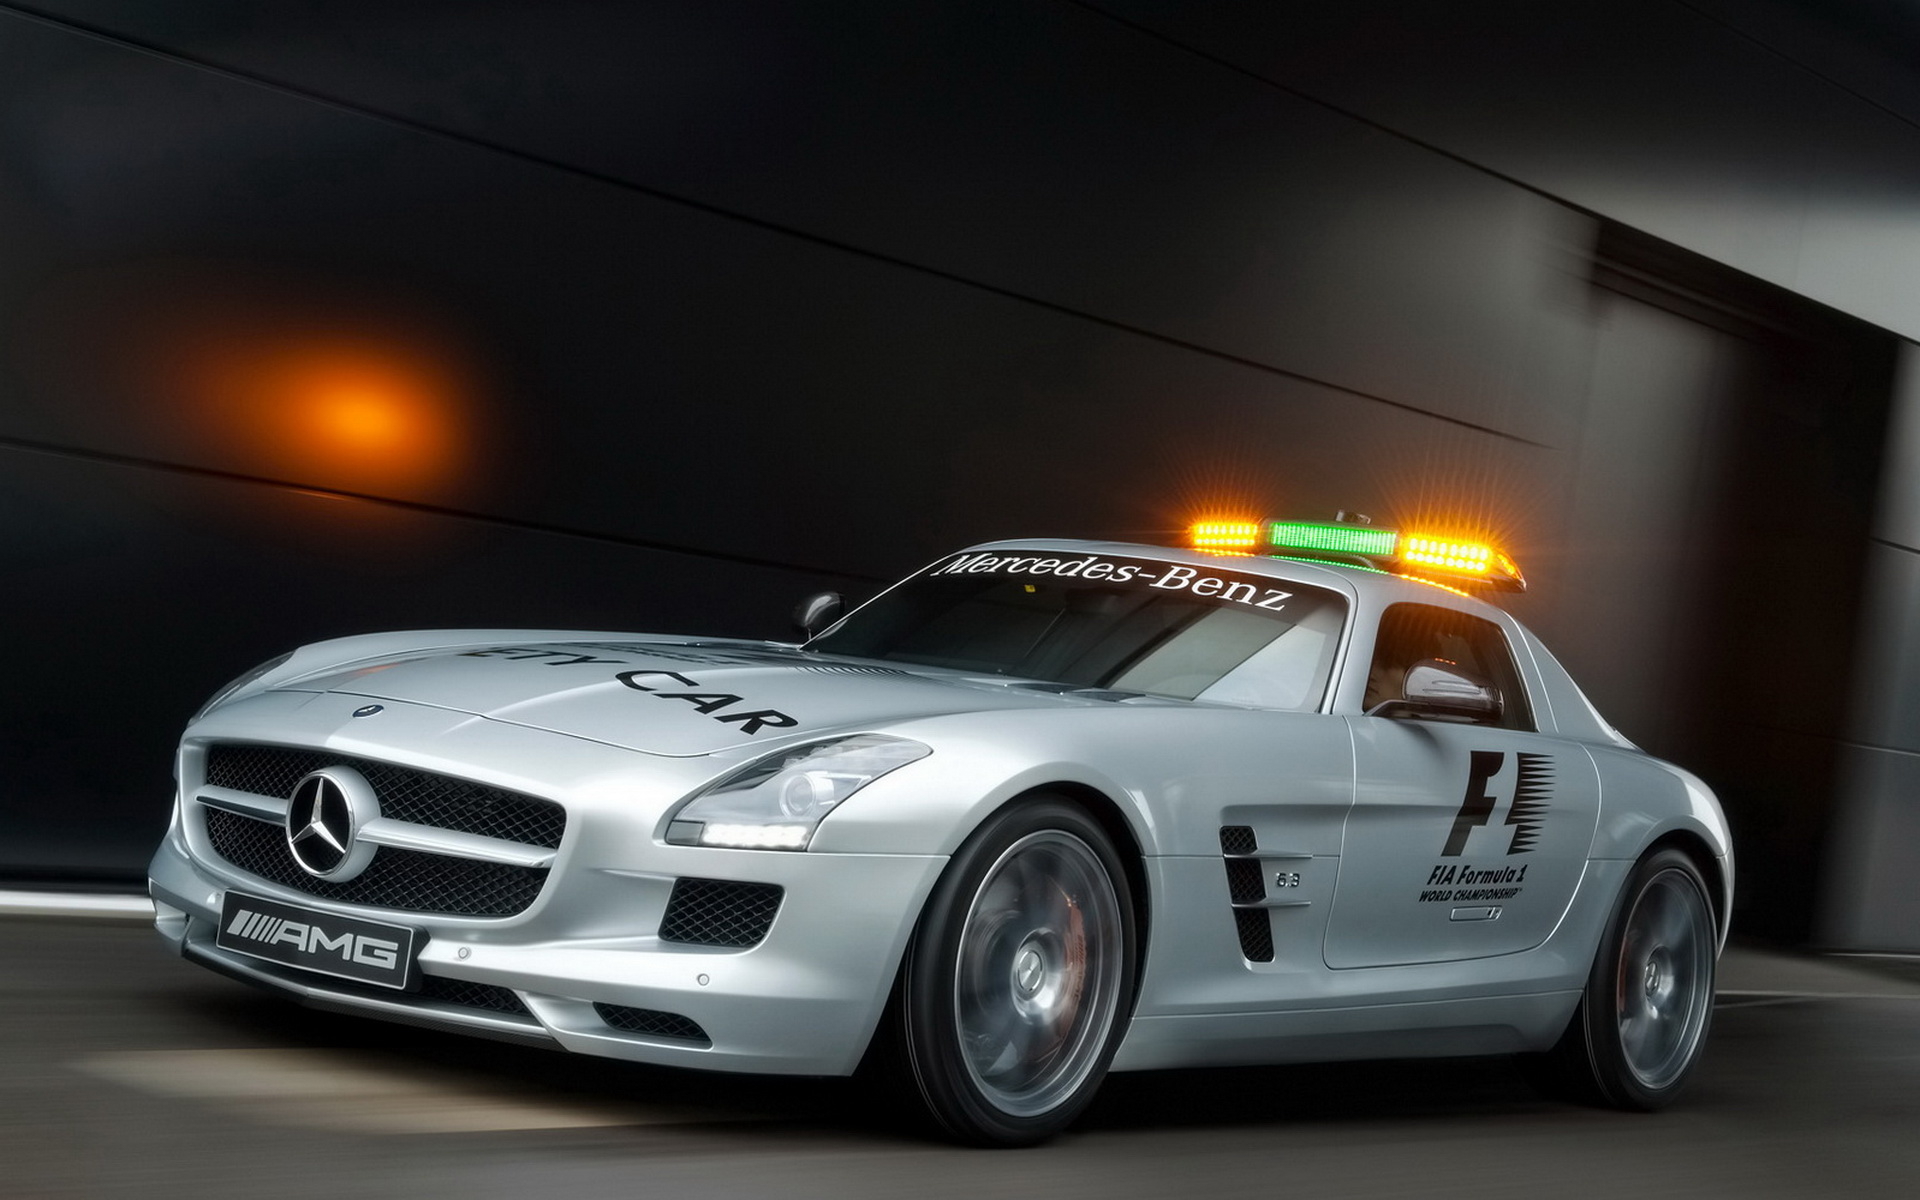 Wallpapers Mercedes amg sports car on the desktop